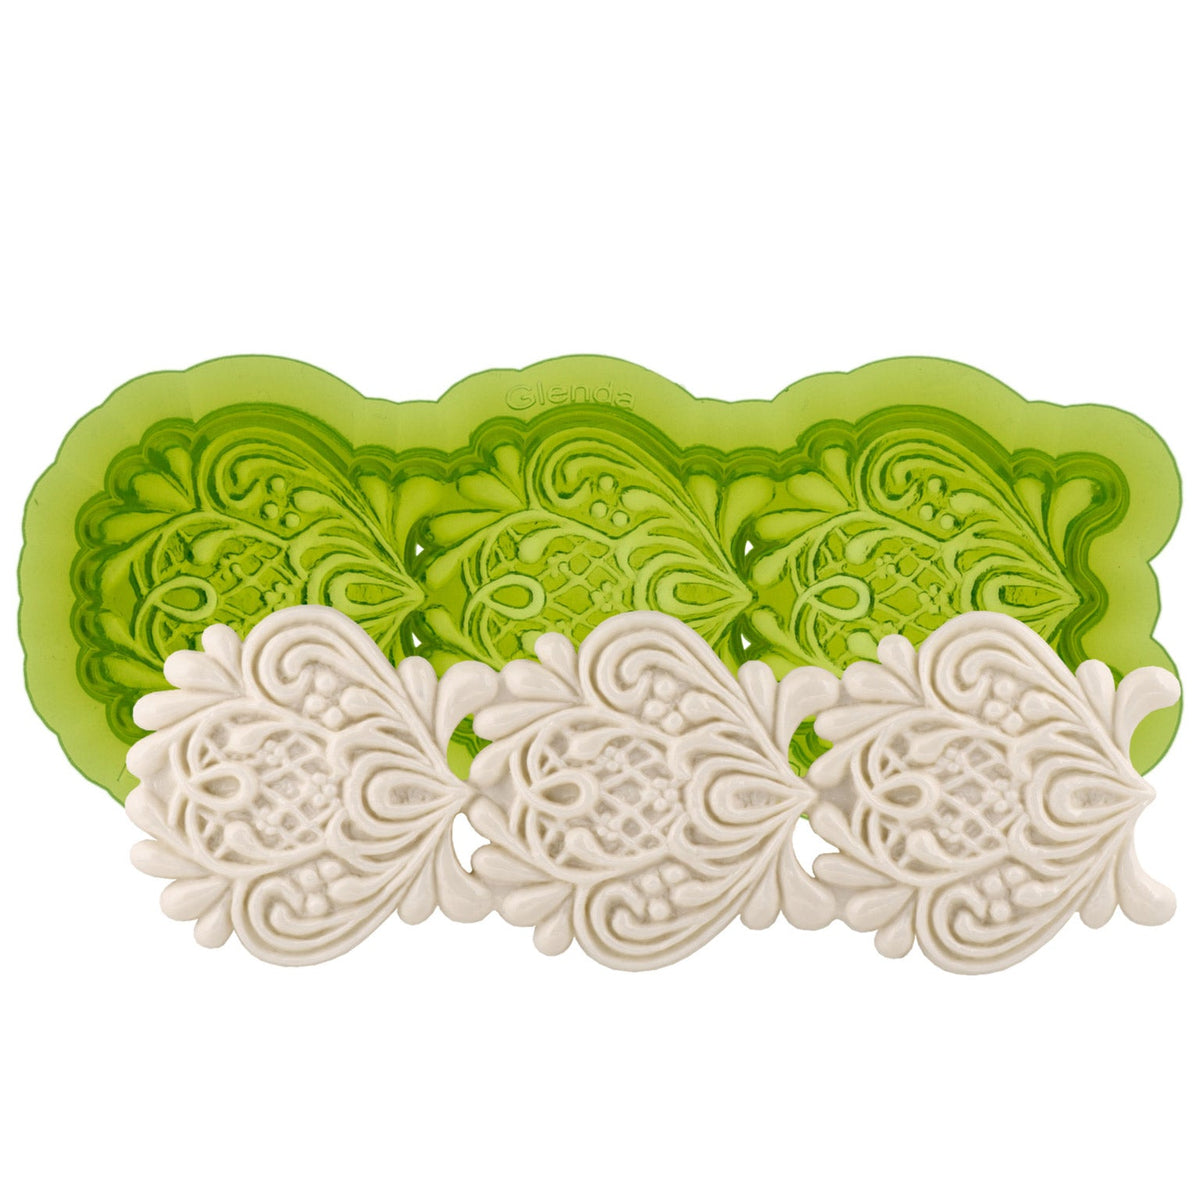 Glenda Lace Silicone Sprig Mold for Ceramics and Pottery by Marvelous Molds